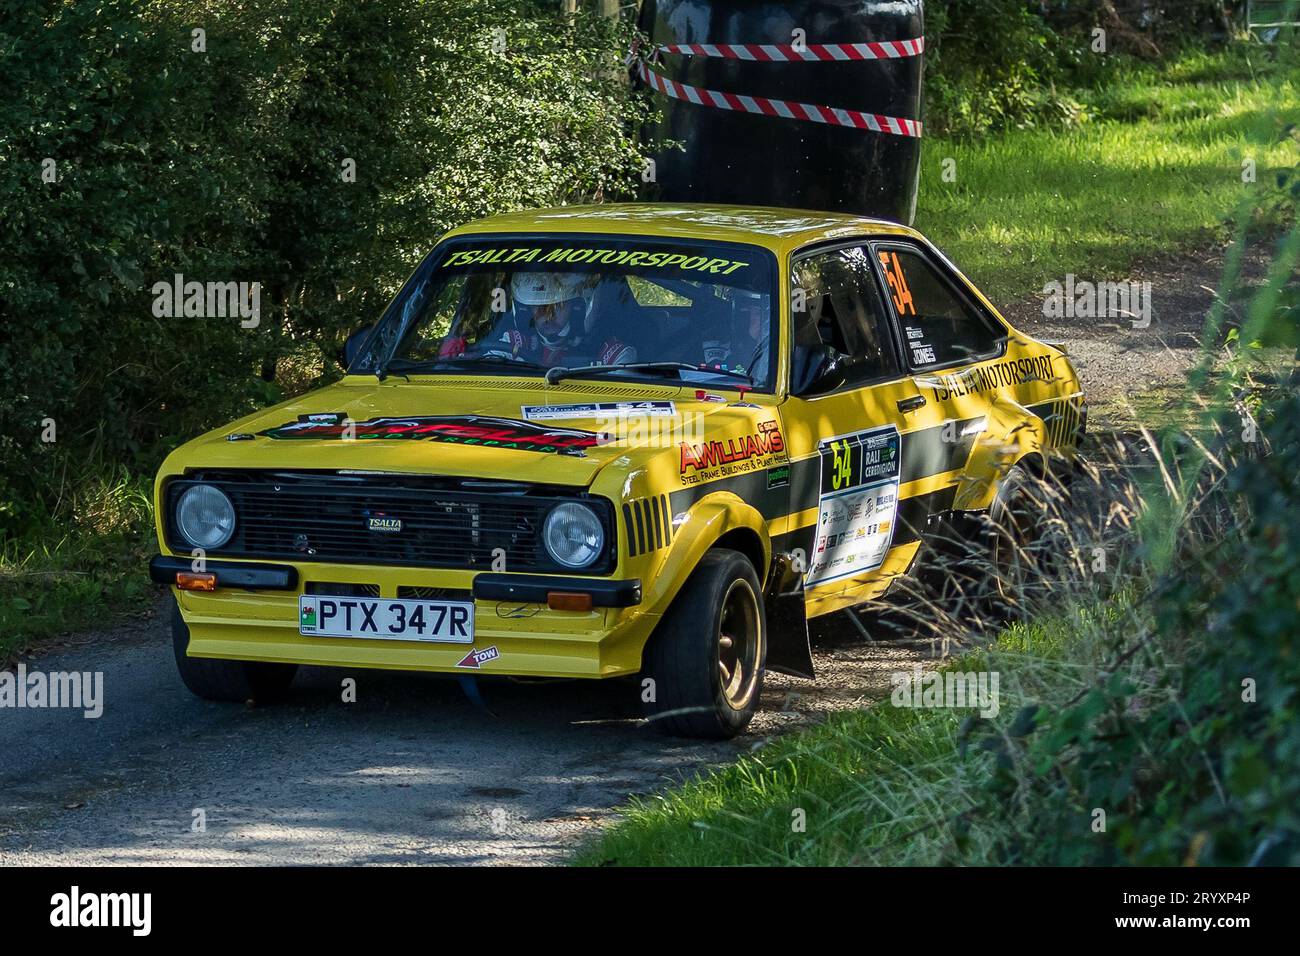 https://c8.alamy.com/comp/2RYXP4P/ceredigion-wales-02-september-2023-rali-ceredigion-irfon-richards-and-co-driver-daniel-jones-in-a-ford-escort-mk2-car-54-on-stage-ss1-borth-1-w-2RYXP4P.jpg